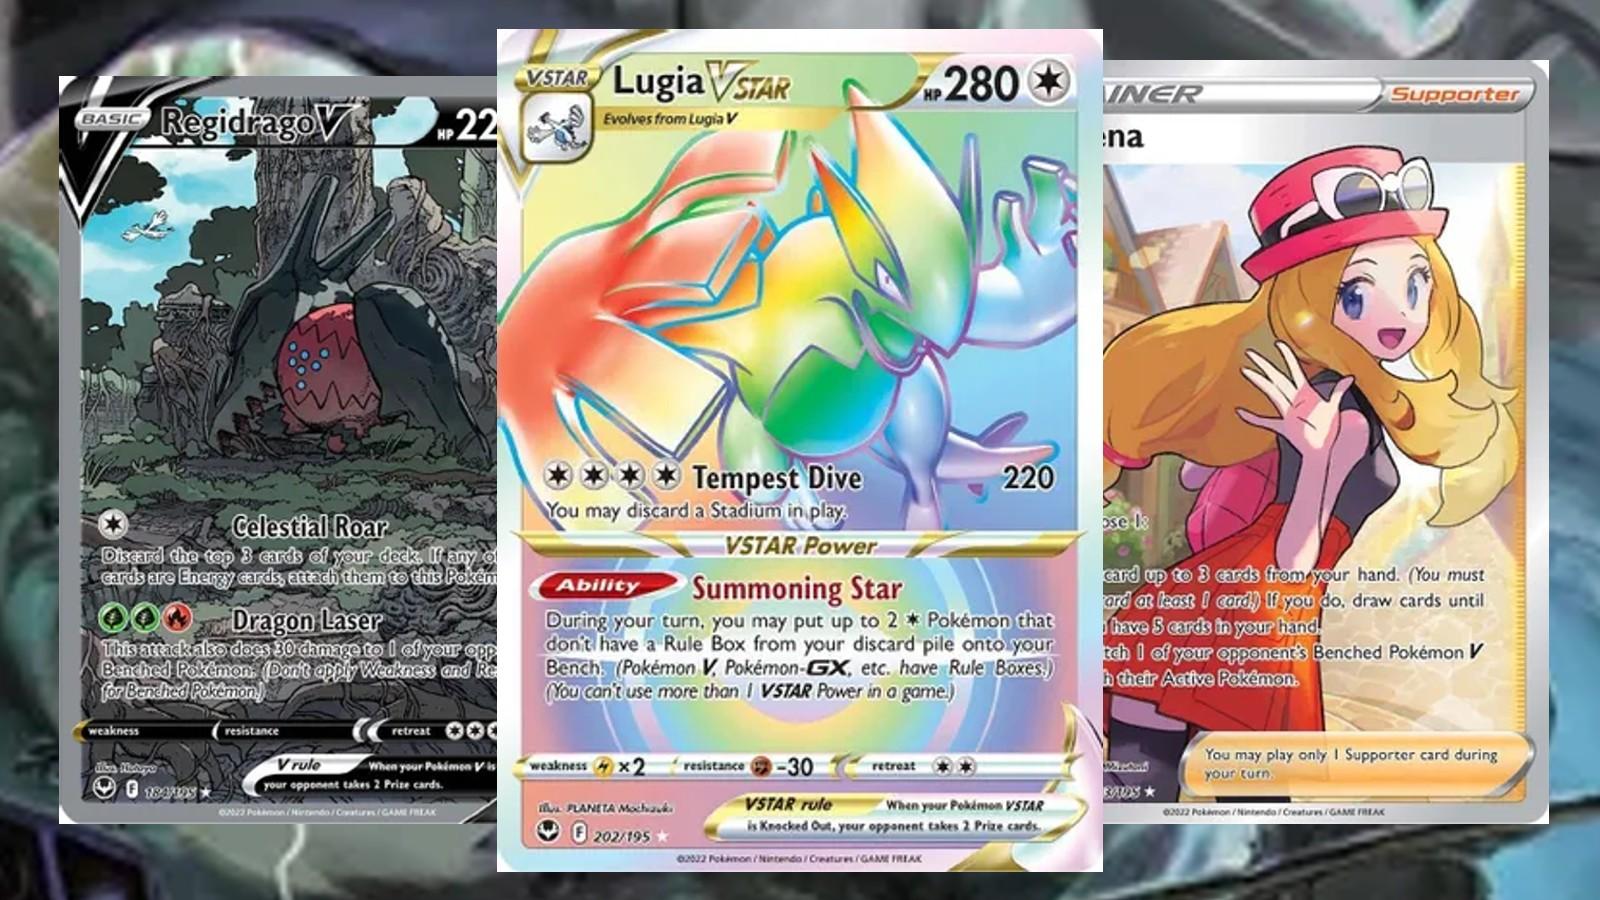 Pokemon Card Sells for More Than P11 Million